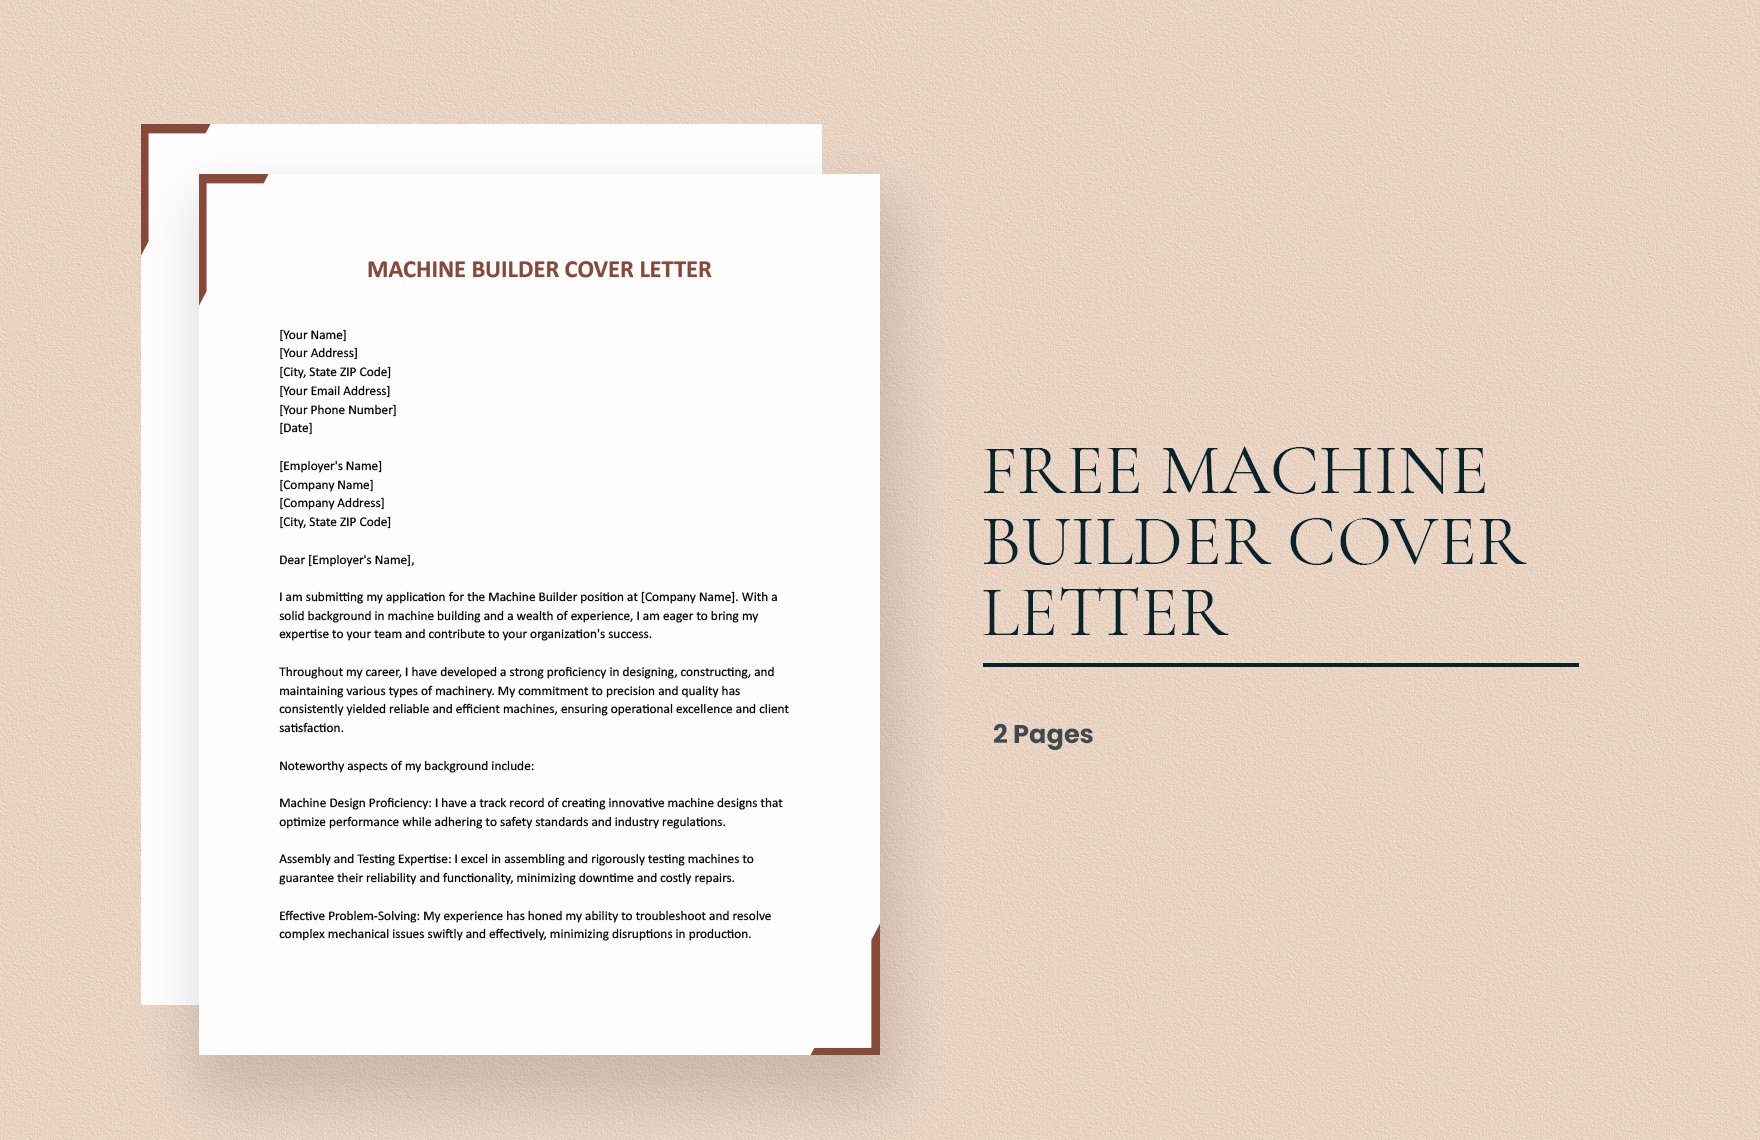 Machine Builder Cover Letter in Word, Google Docs